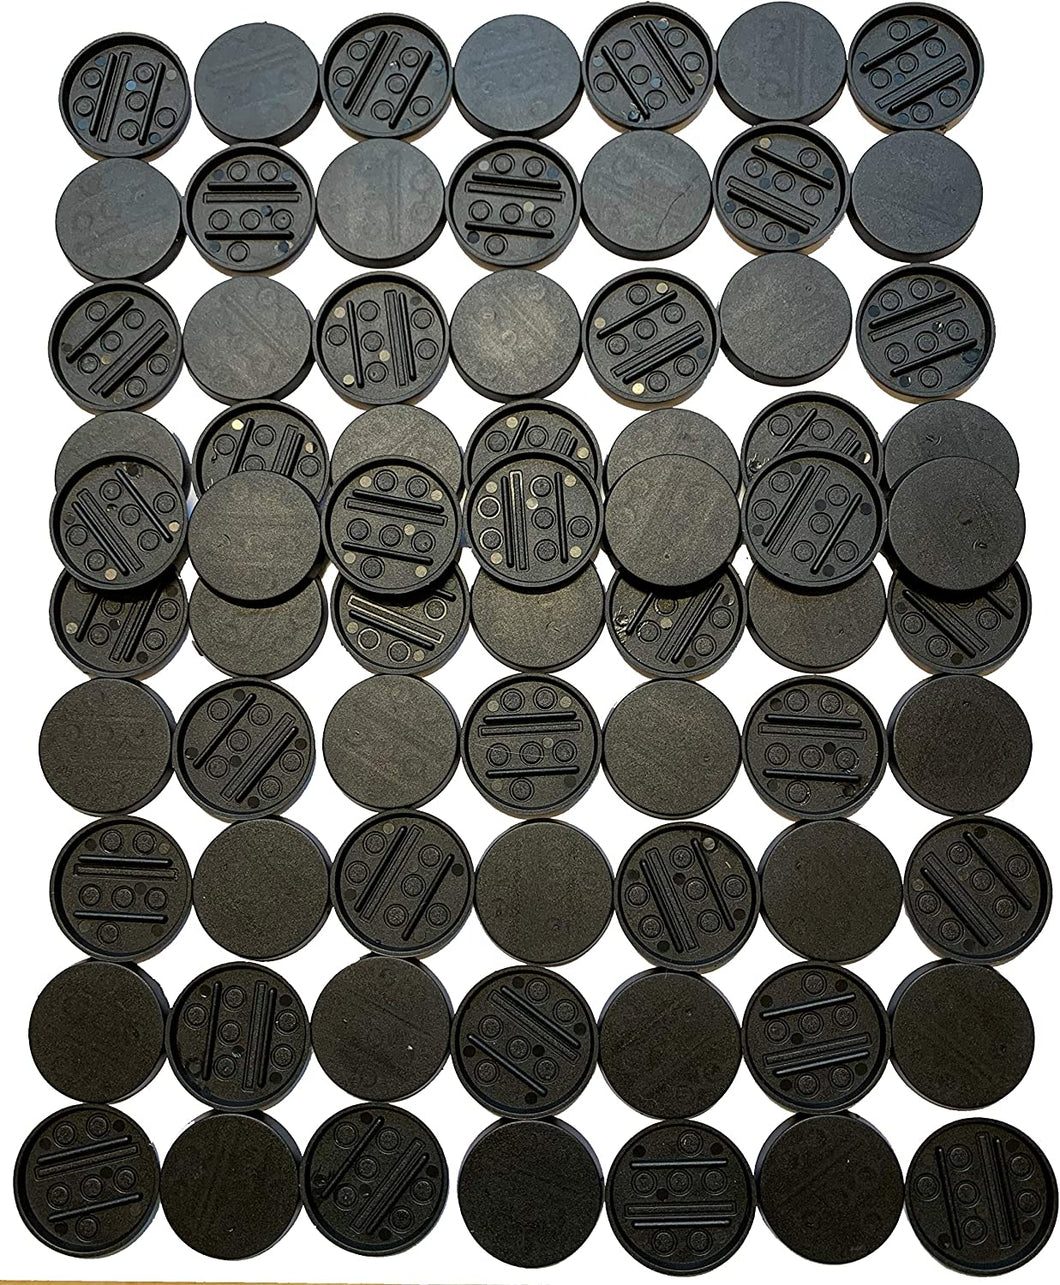 30mm Flat Multi-Purpose Bases for Miniatures (roughly 1.2